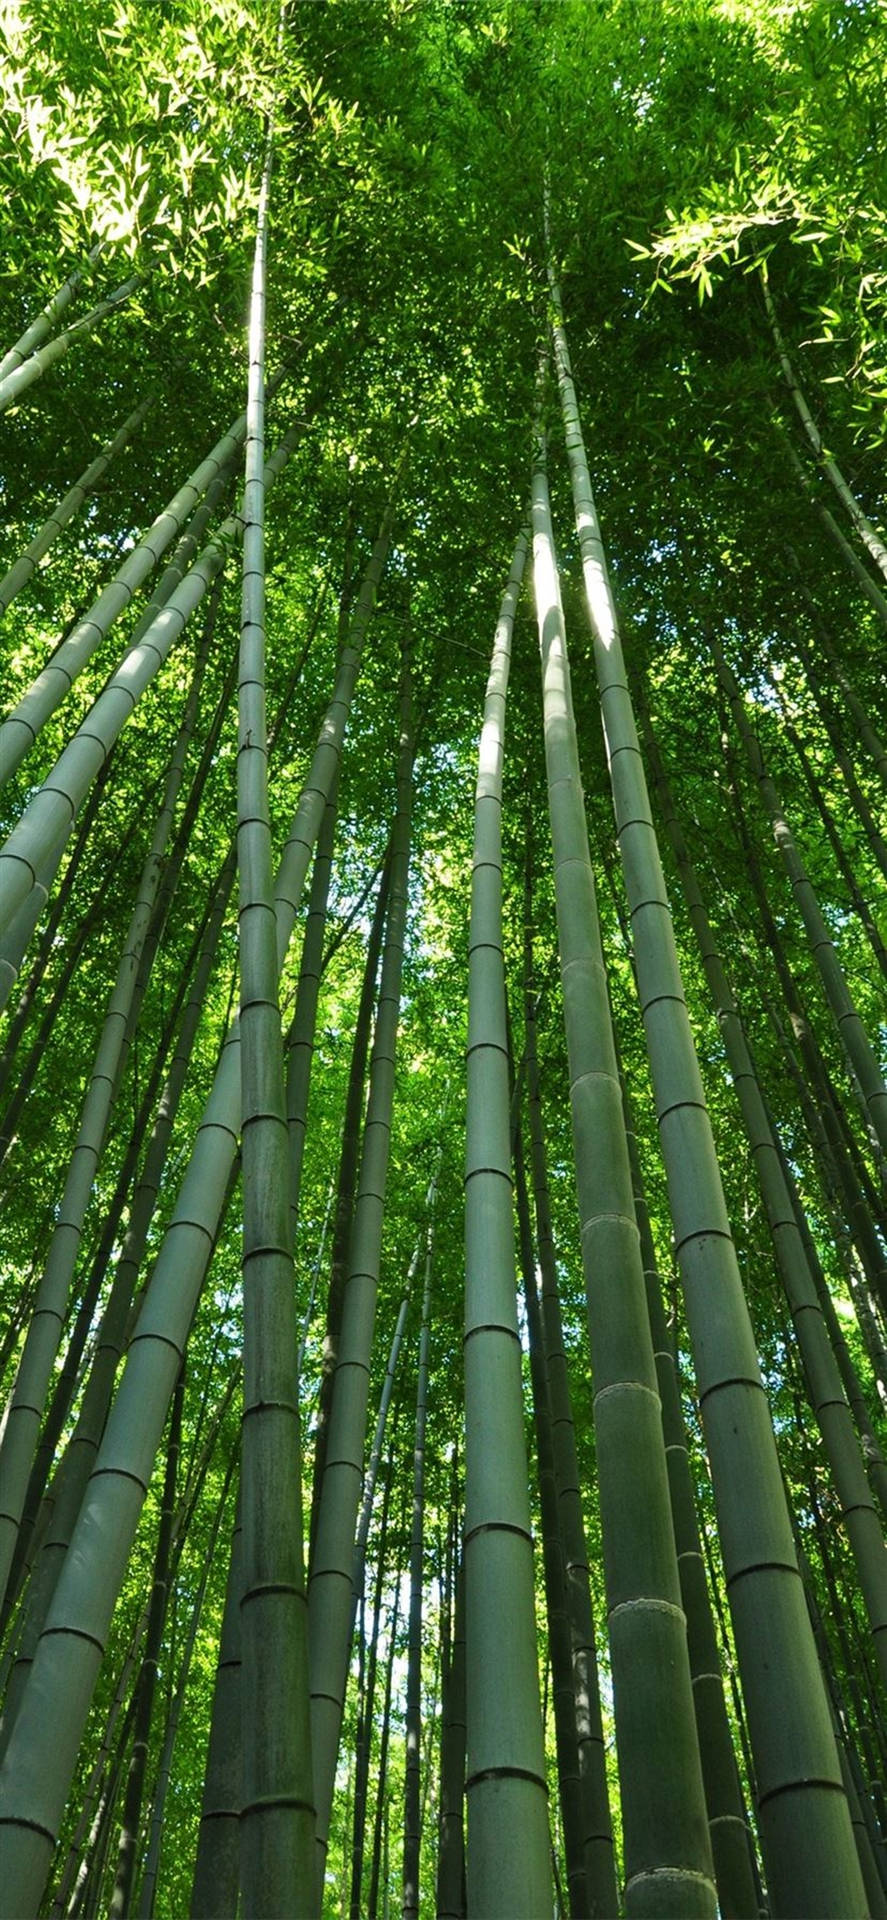 Bamboo Culm And Leaves Iphone